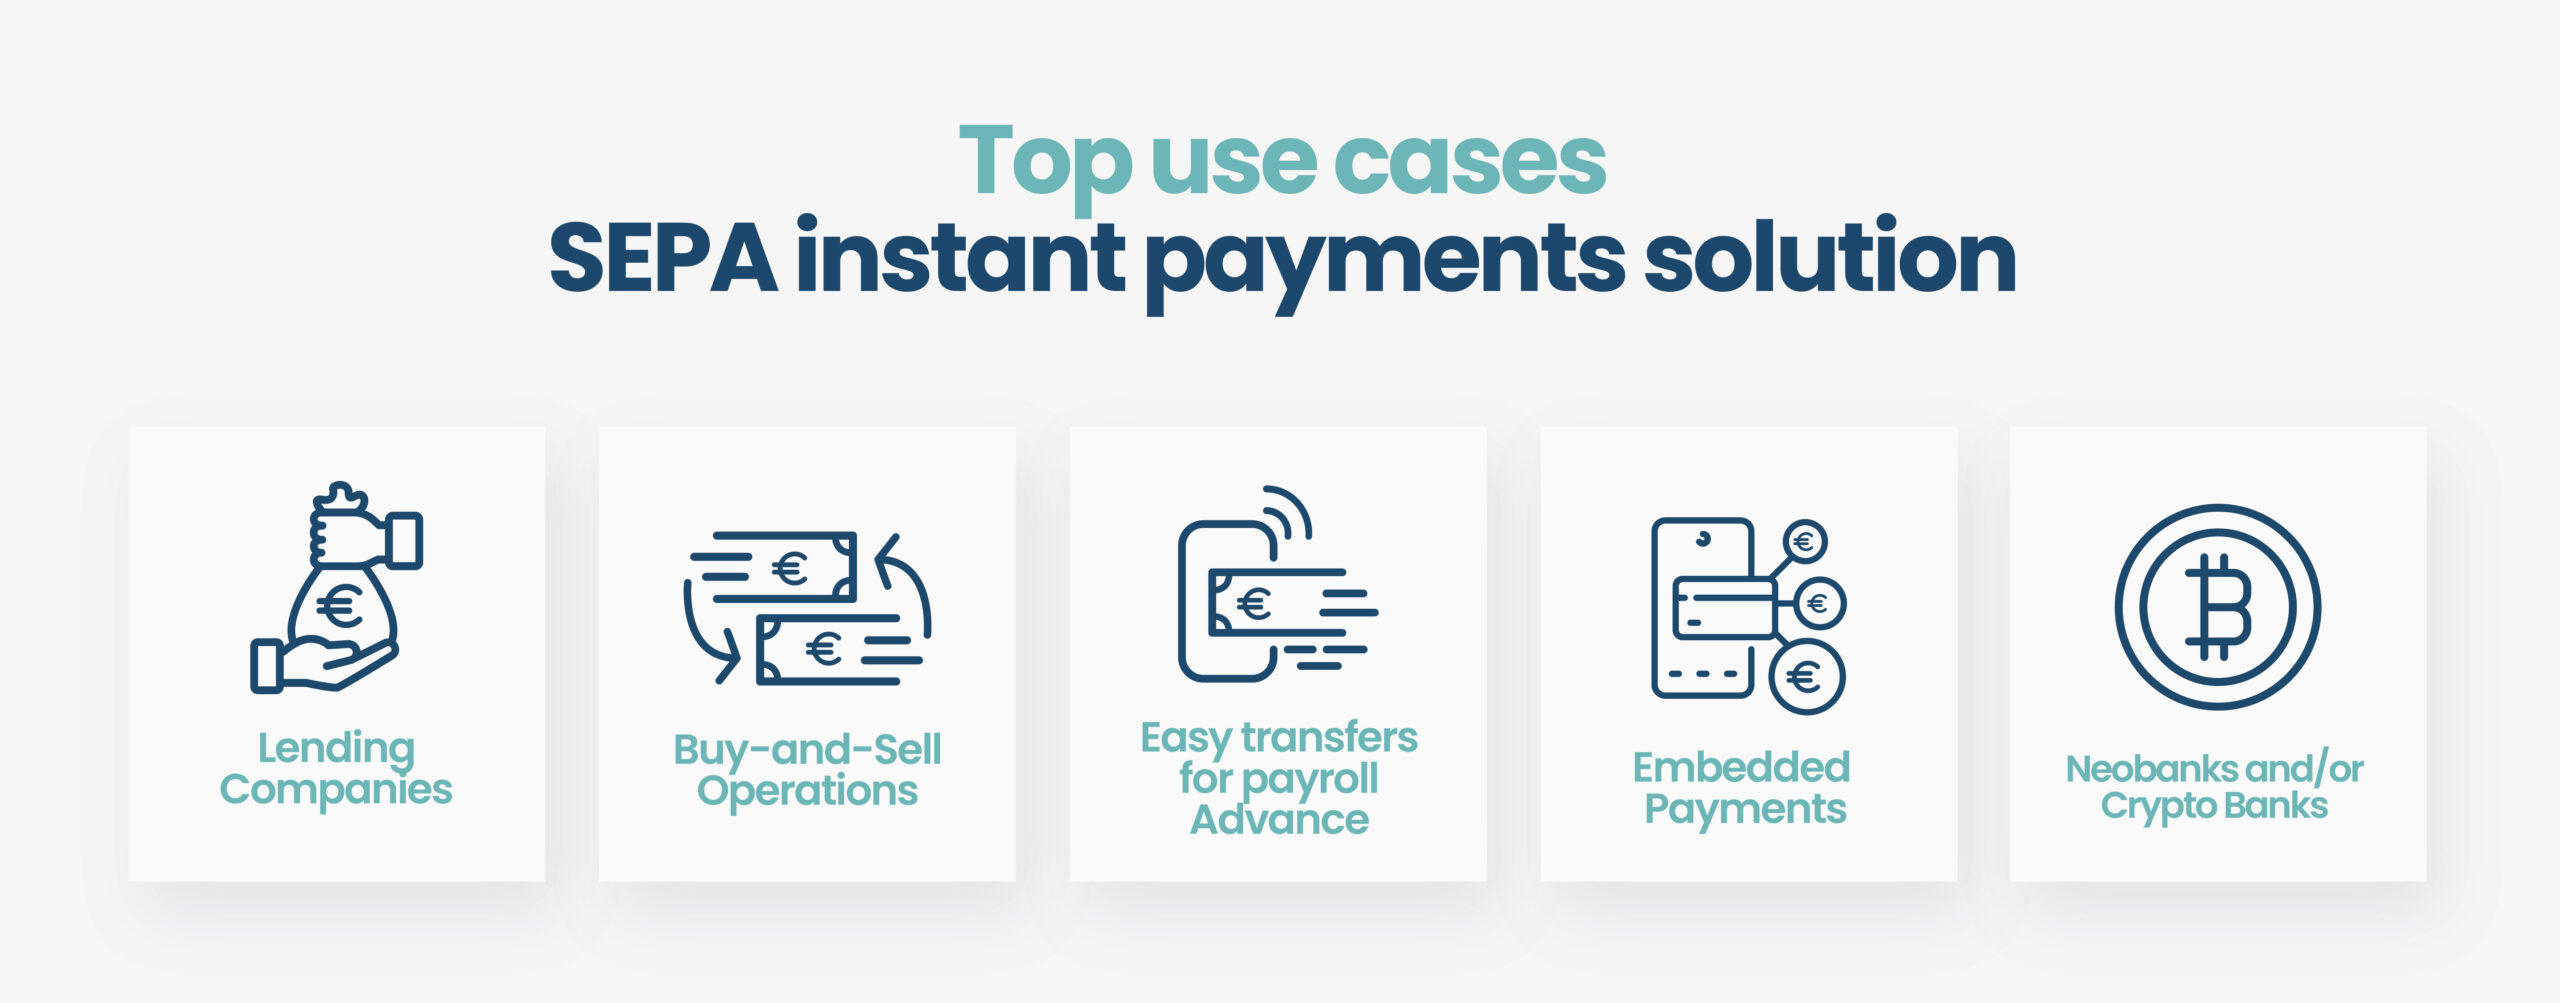 Top use cases: SEPA instant payments solution